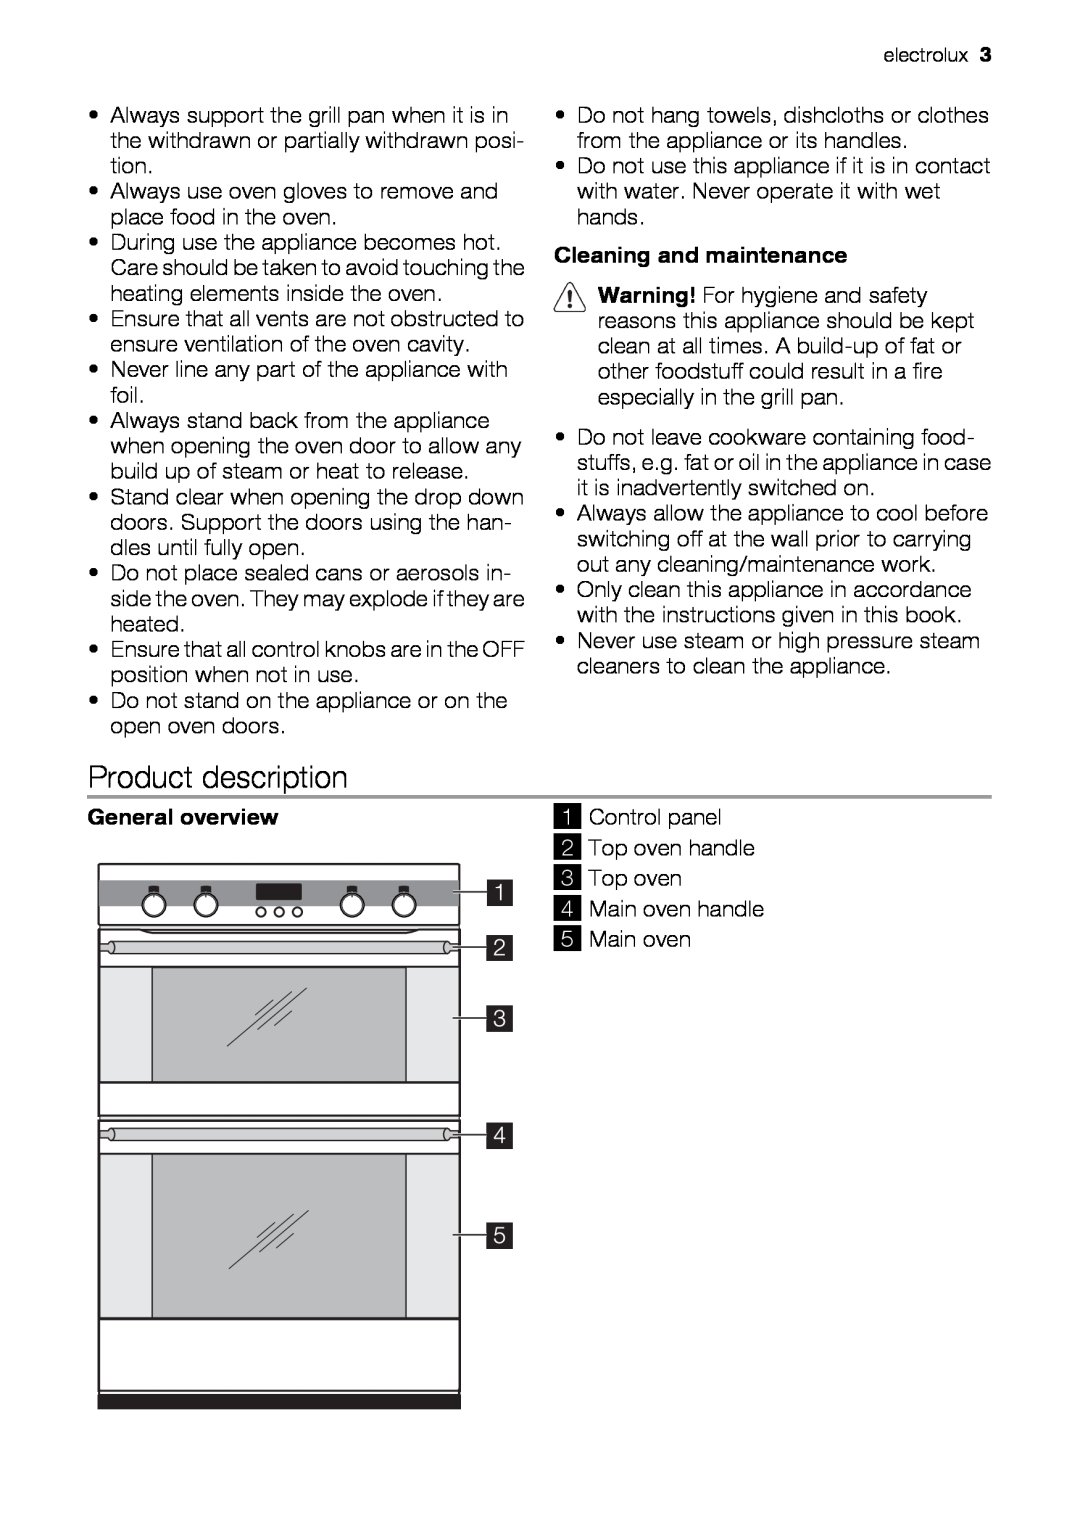 Electrolux EOD43103 Product description, Cleaning and maintenance, General overview, Control panel, Top oven handle 